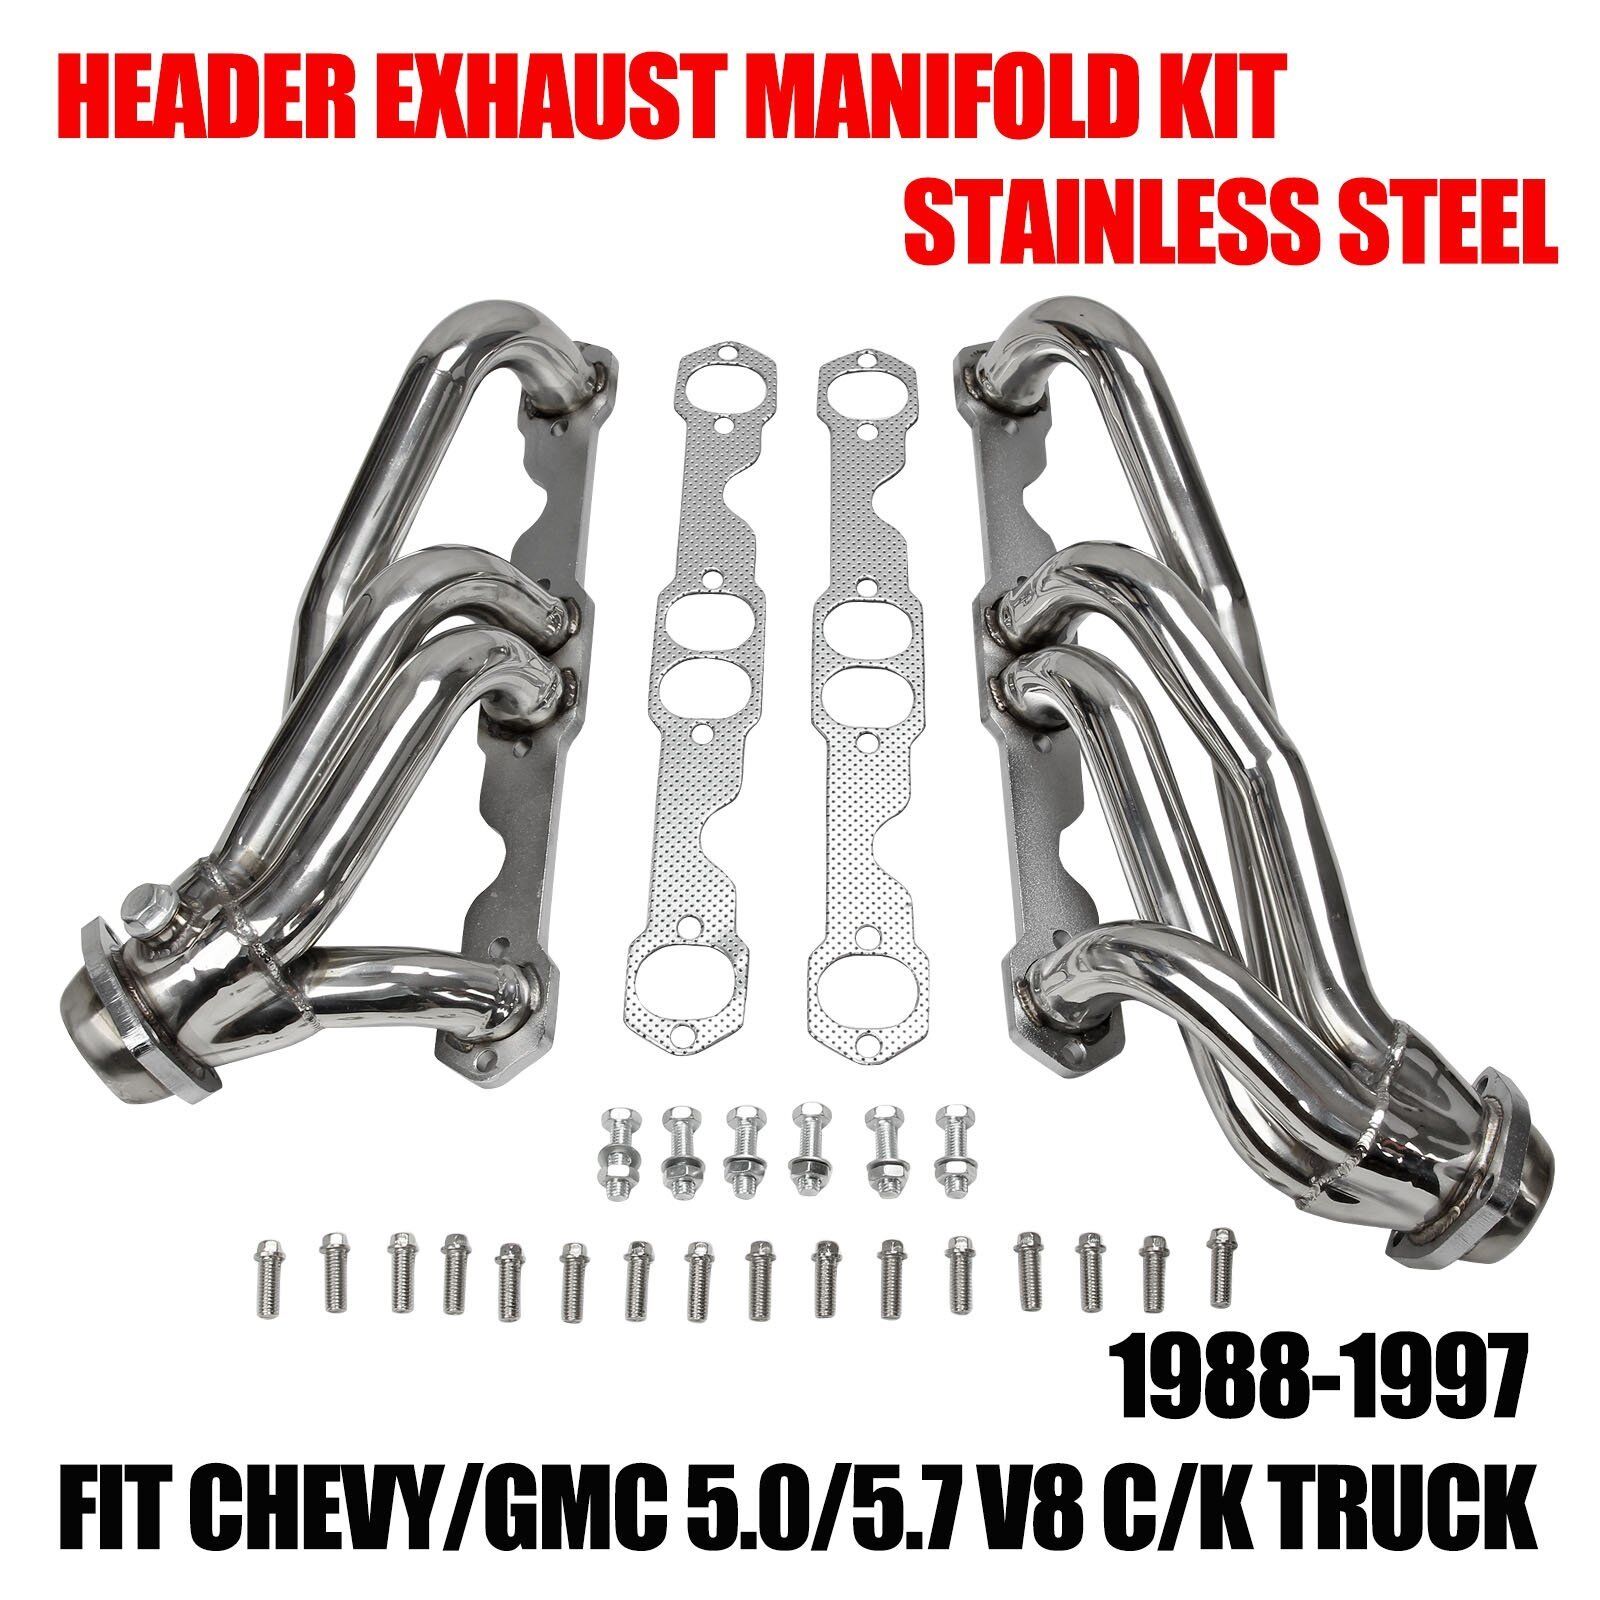 FIT CHEVY/GMC 5.0/5.7 V8 C/K TRUCK 88-97 STAINLESS STEEL HEADER EXHAUST MANIFOLD